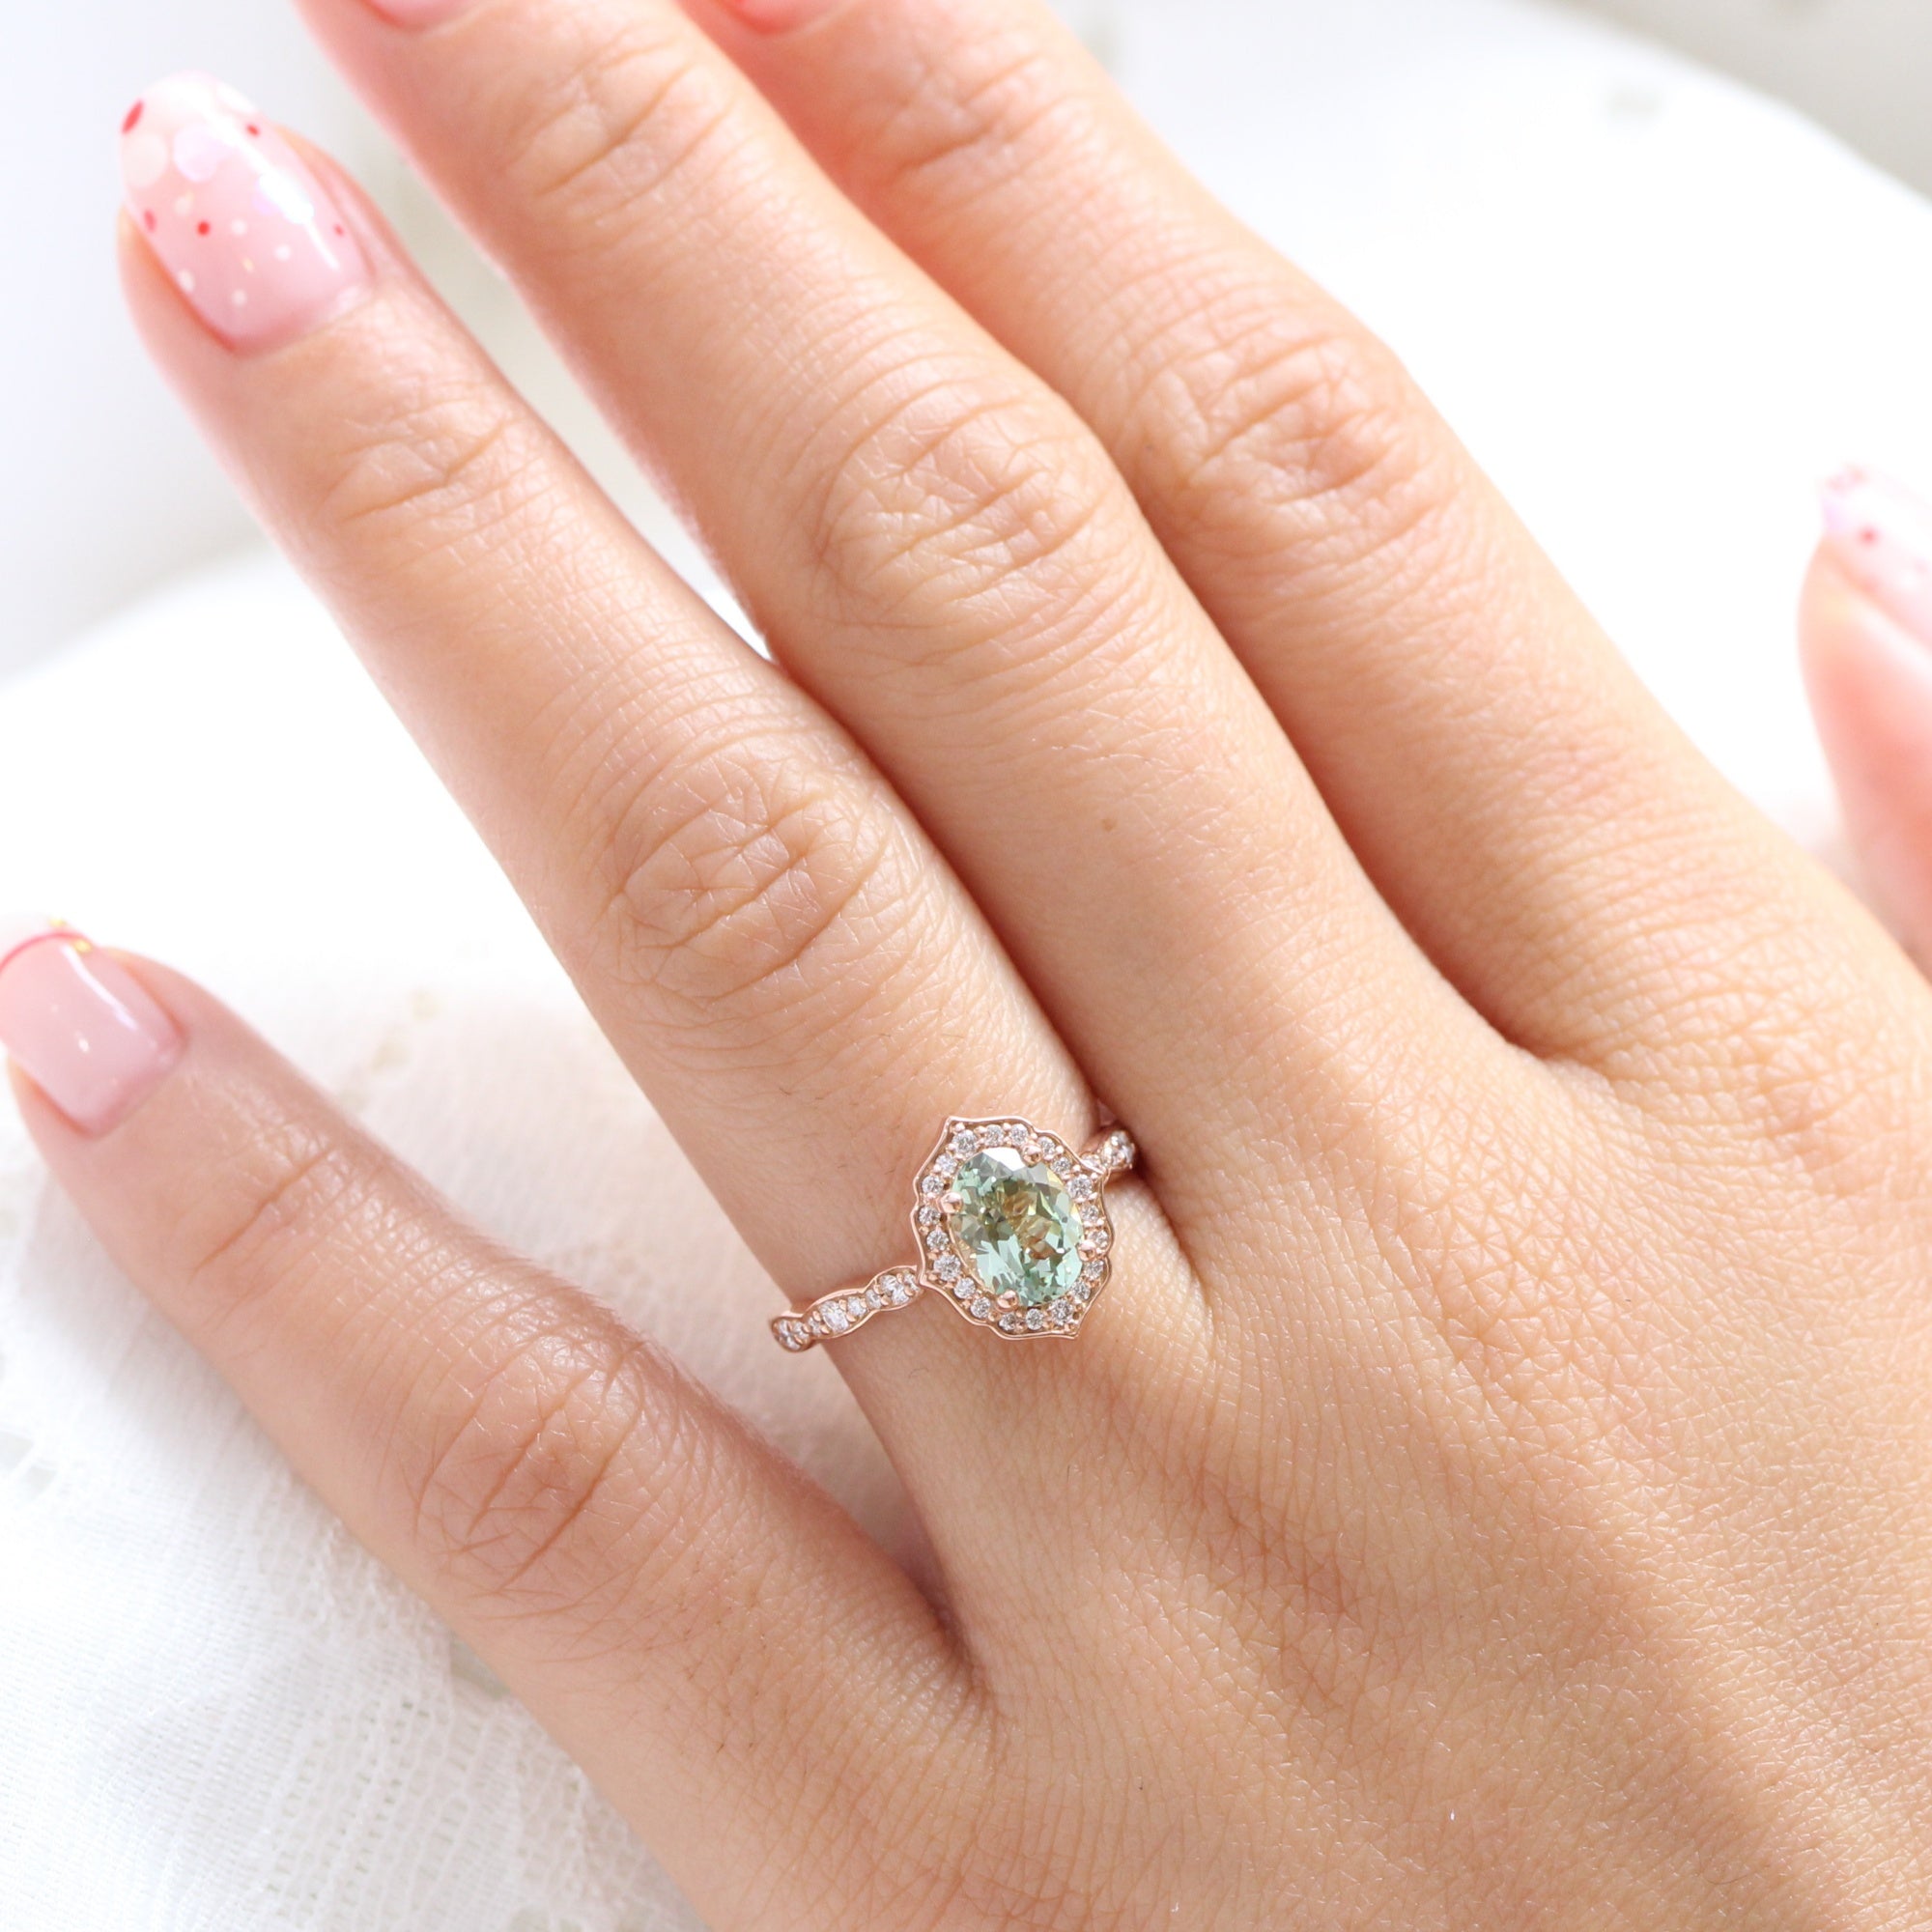 Vintage Floral Sea Foam Green Sapphire Ring in 14k Rose Gold Scalloped Diamond Band, Size 6.5